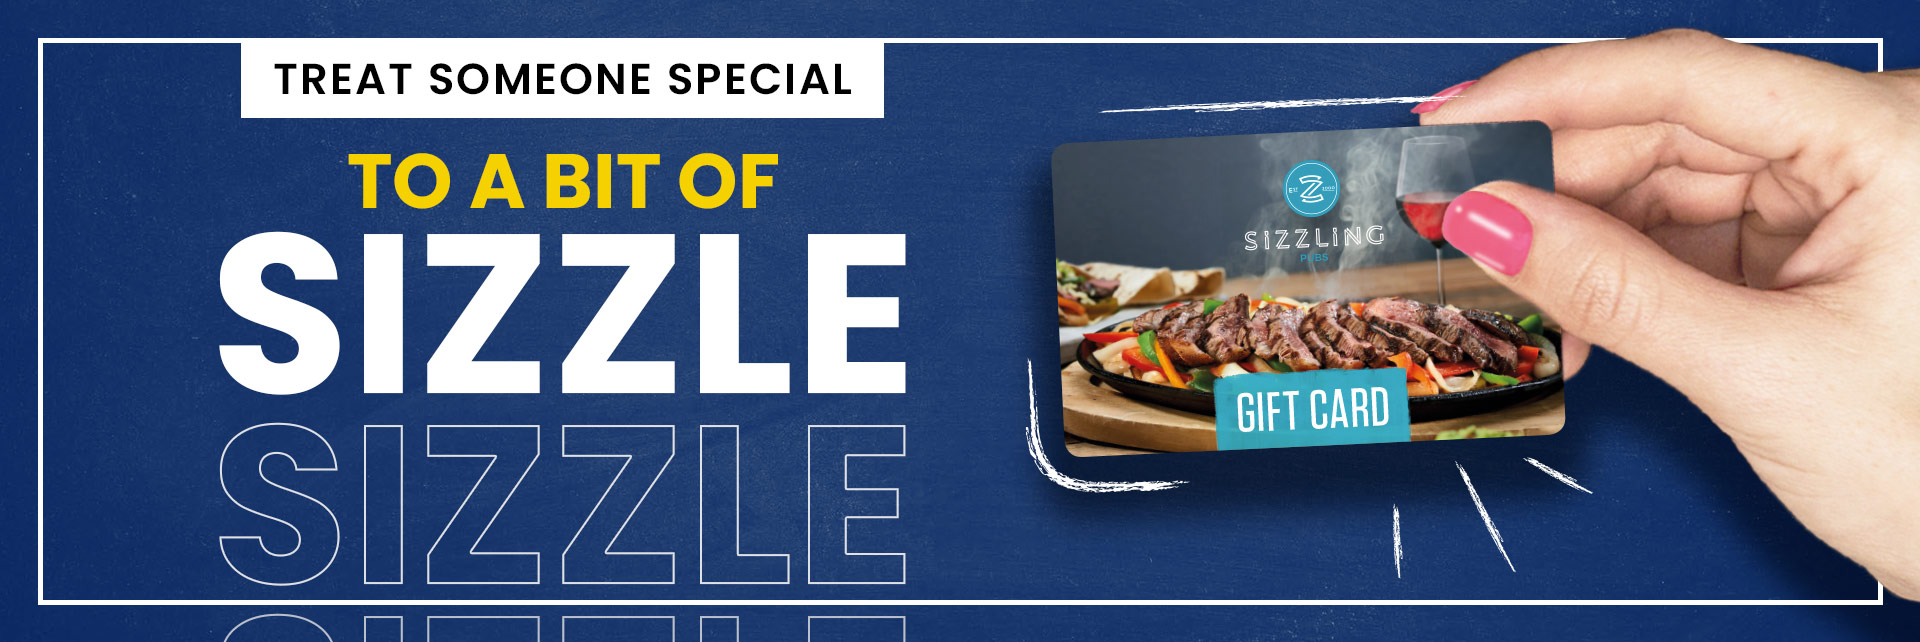 Sizzling Pubs Gift Card at The Ship in Paignton